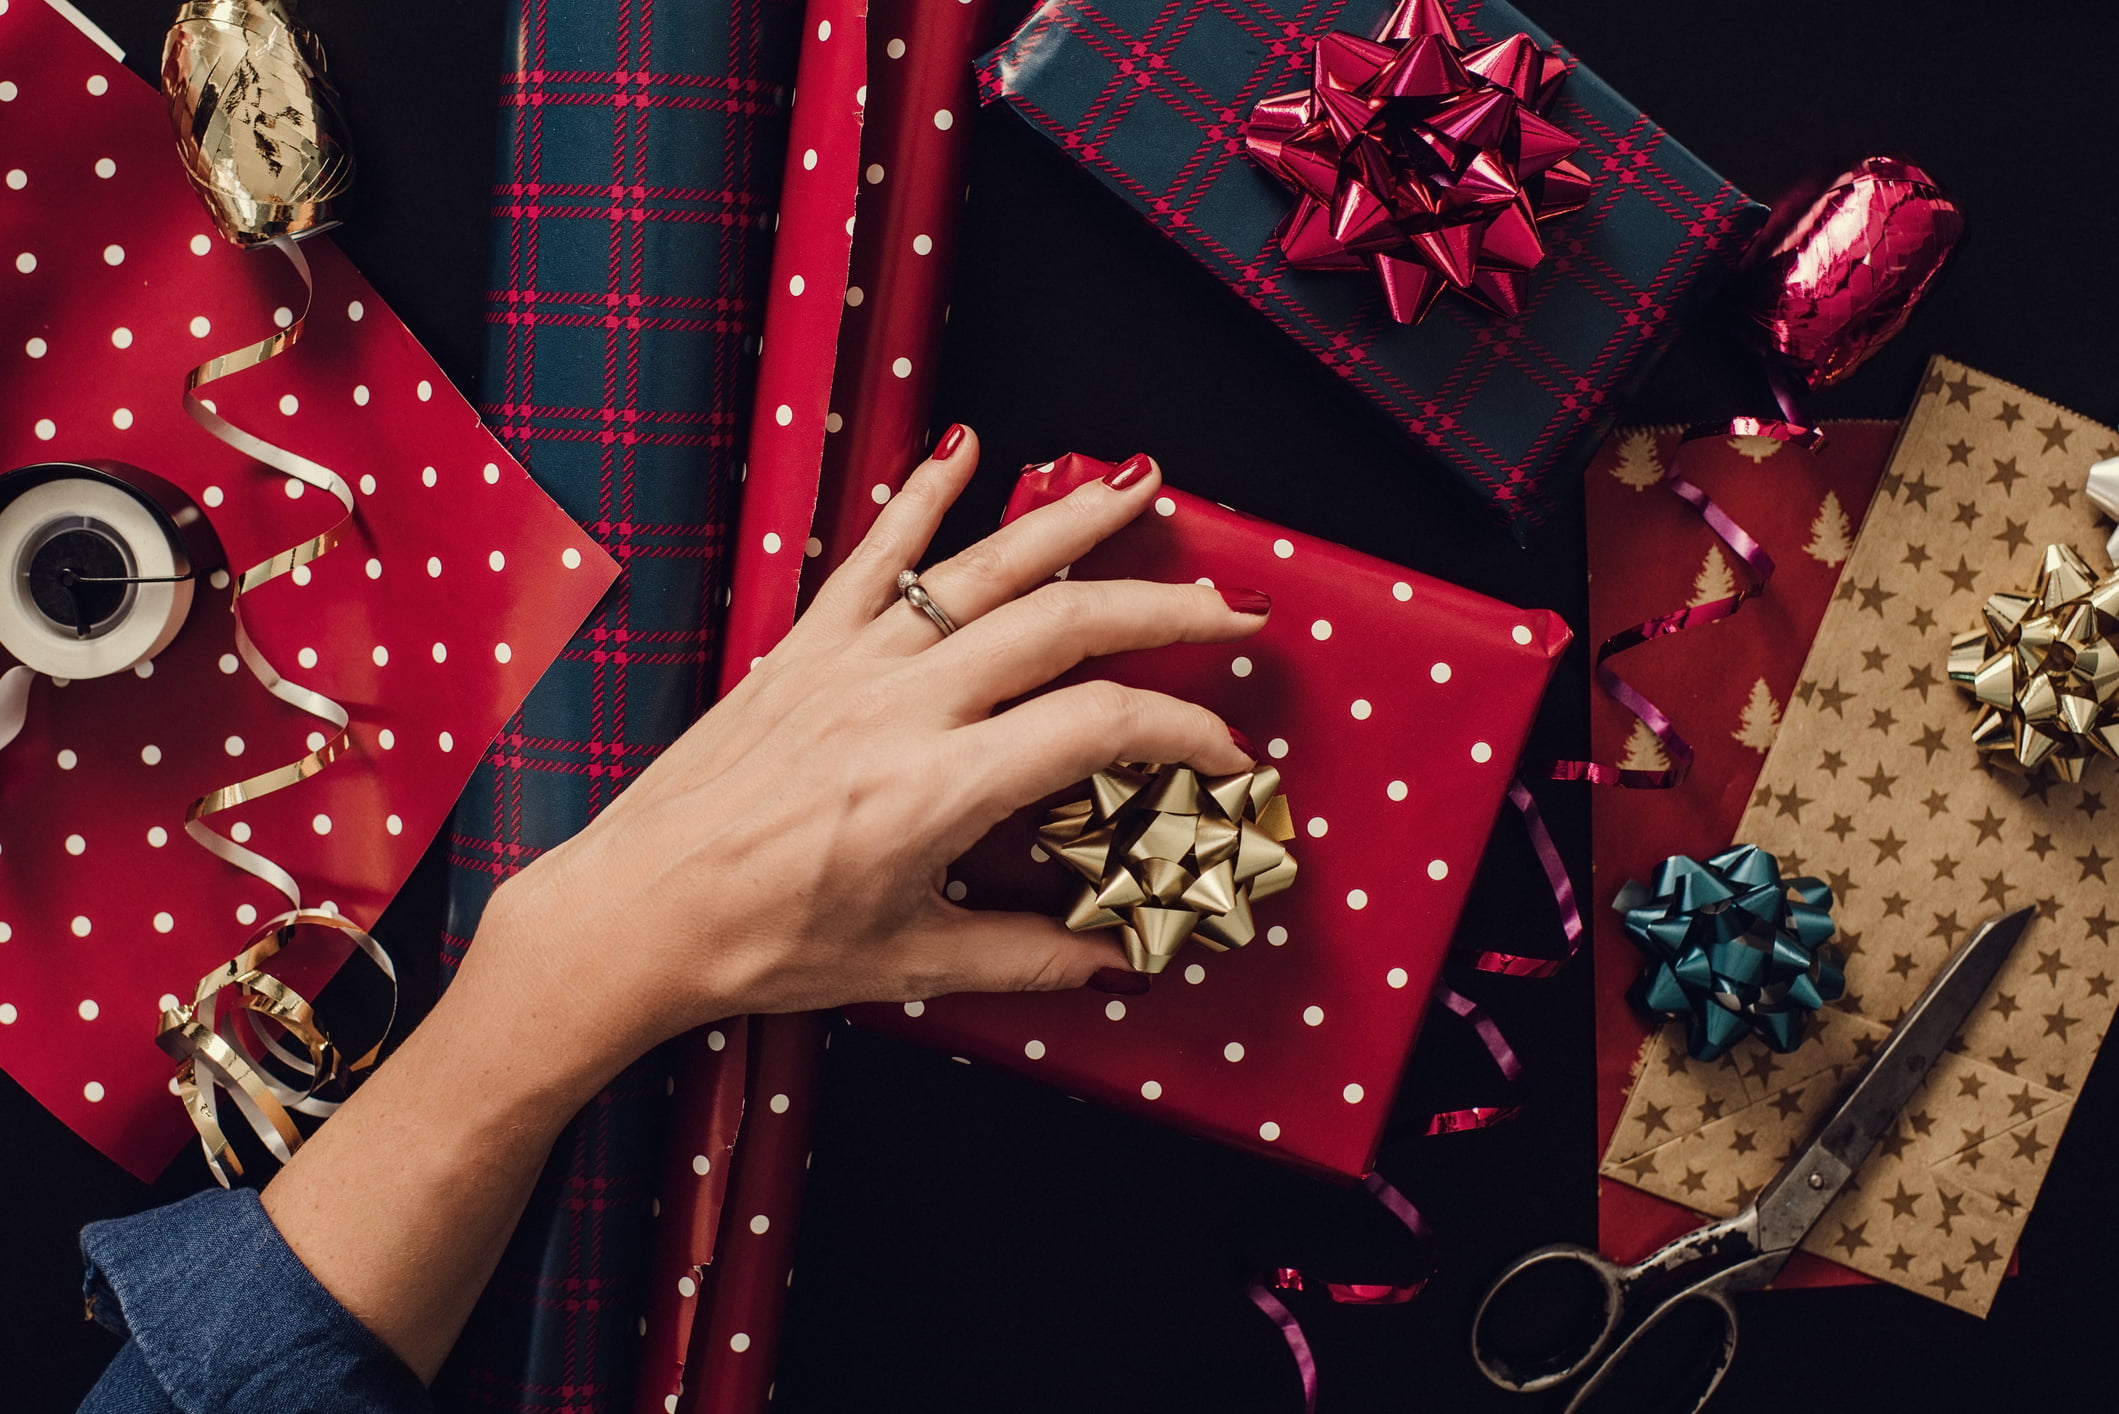 A hand with red painted nails and an engagement ring on its finger is placing a gold bow on a package wrapped in red paper with white polka-dots. Around the gift are rolls of holiday wrapping paper, ribbons, bows, and a pair of scissors.